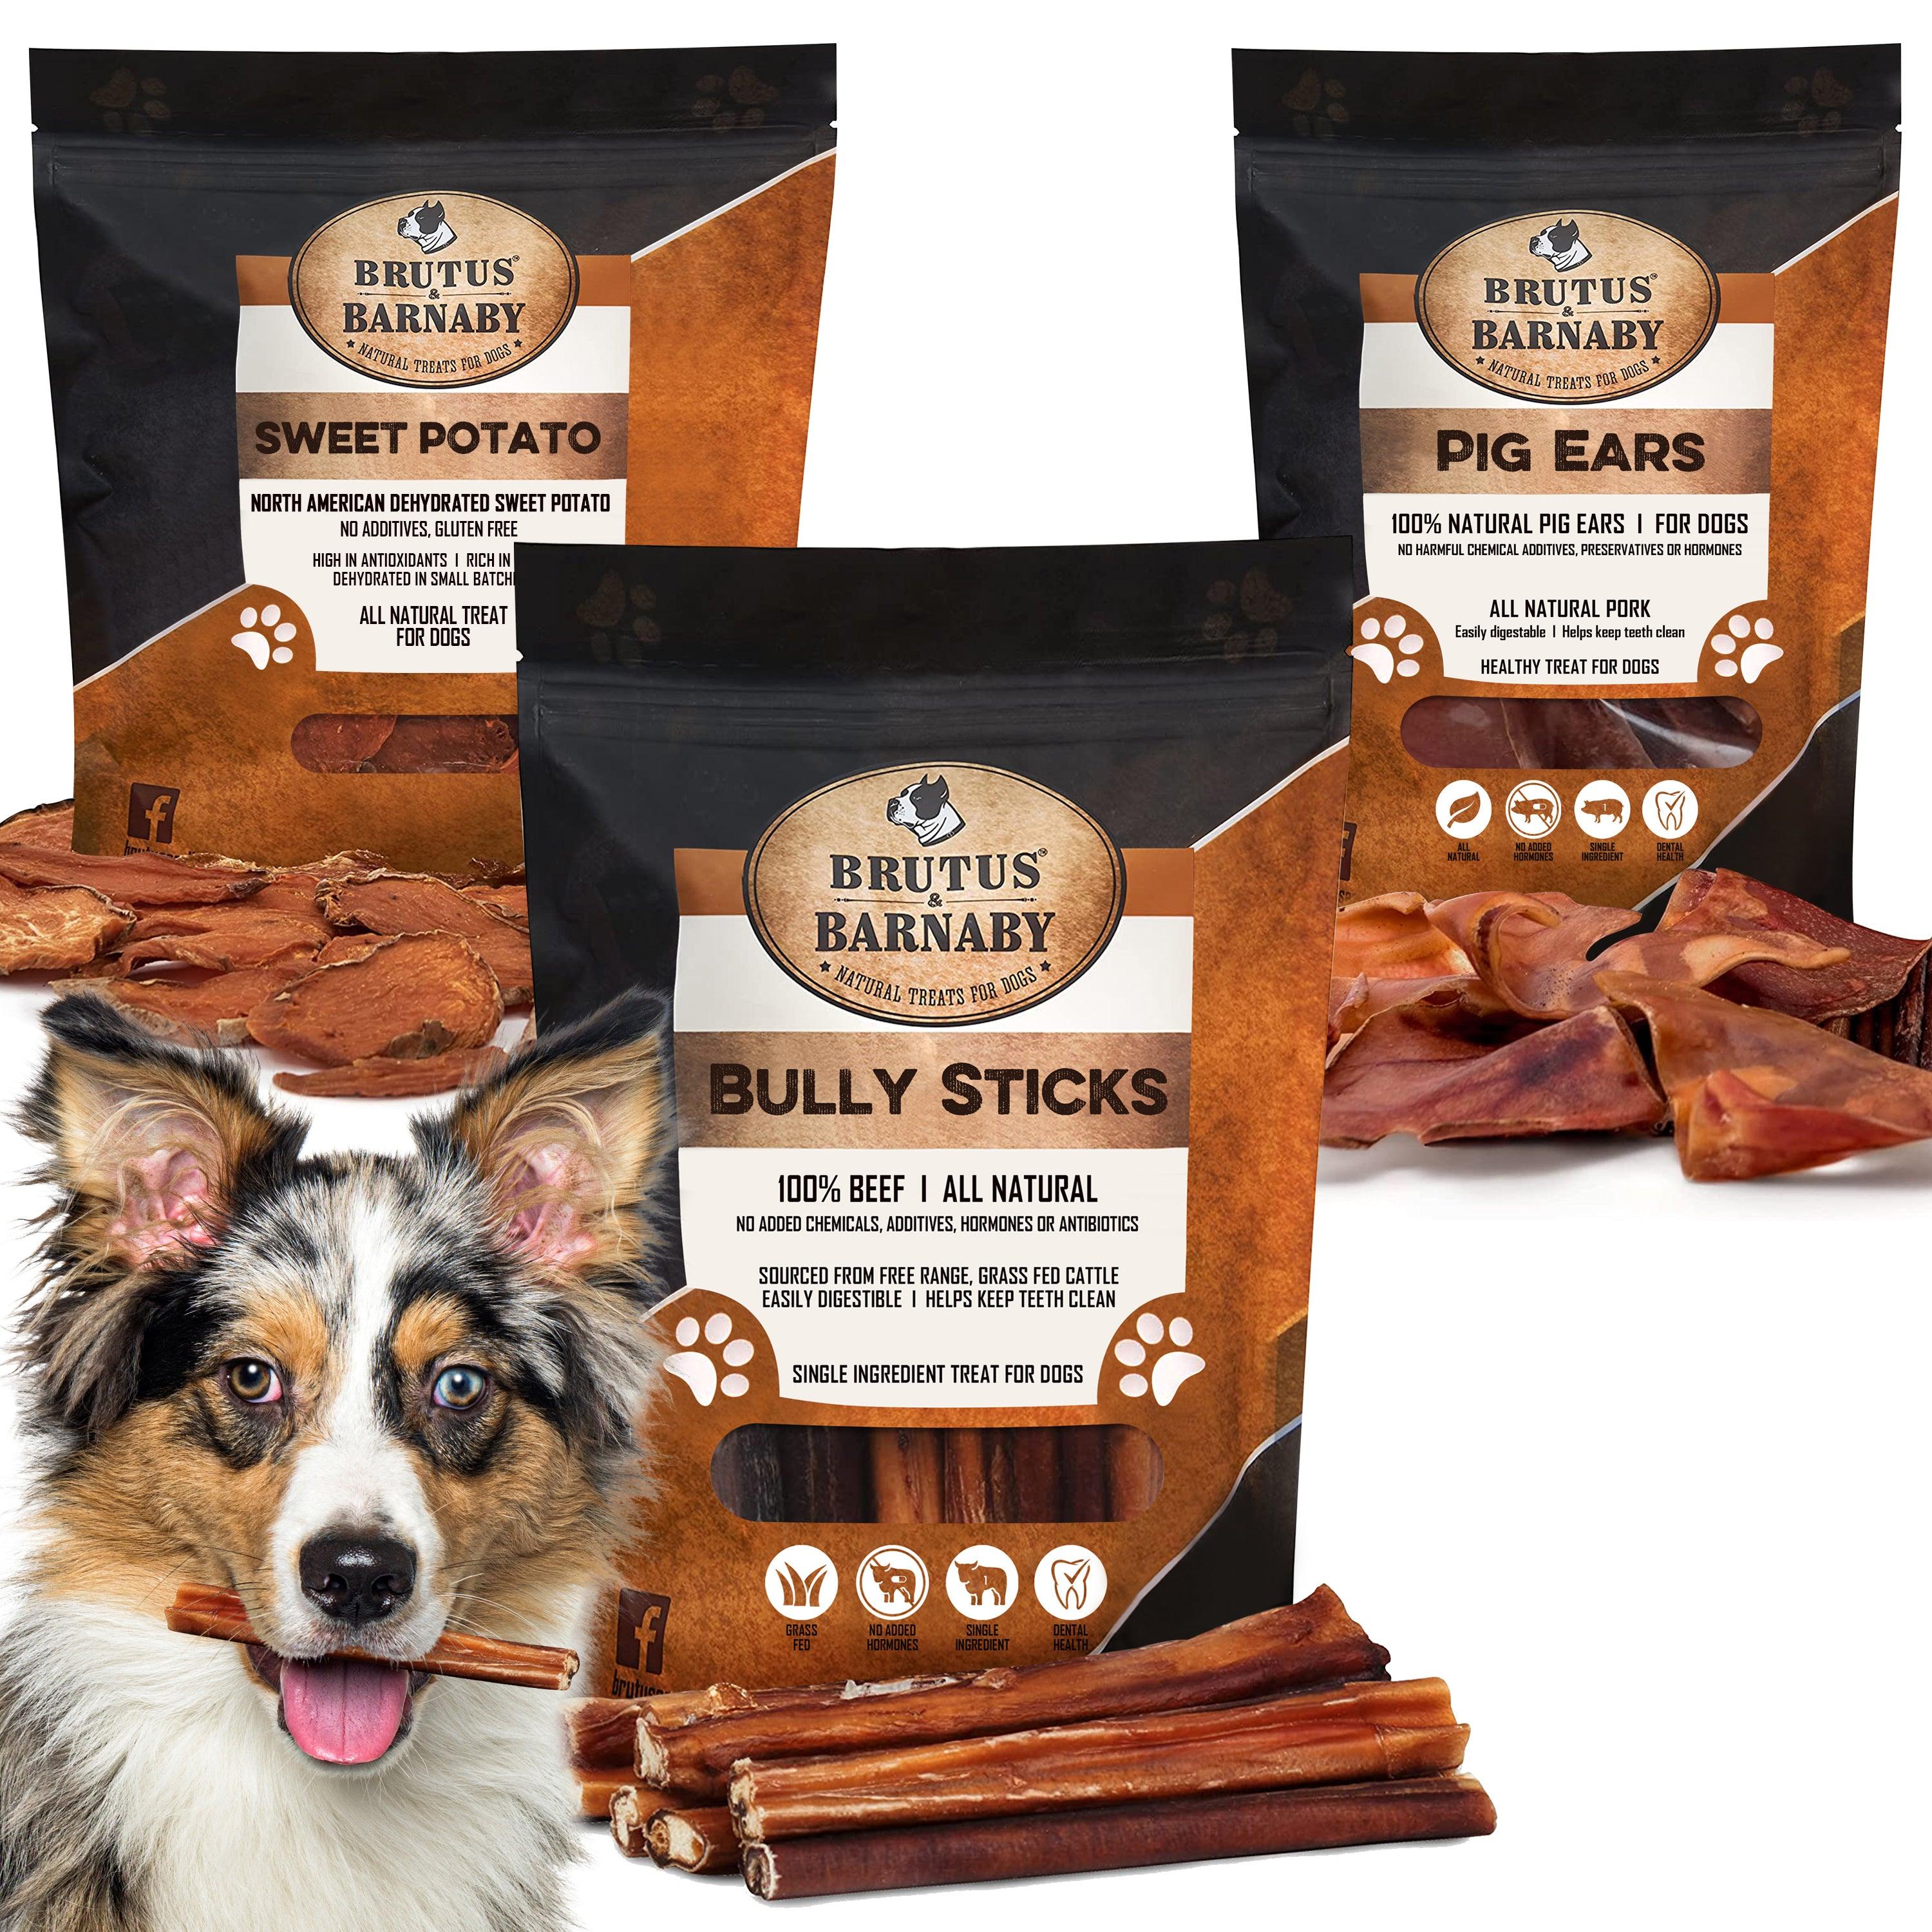 25 Pig Ears, 12 Bully Sticks, Sweet Potato Treats (14oz) - with no Added Colorings, Chemicals or Hormones - Brutus & Barnaby